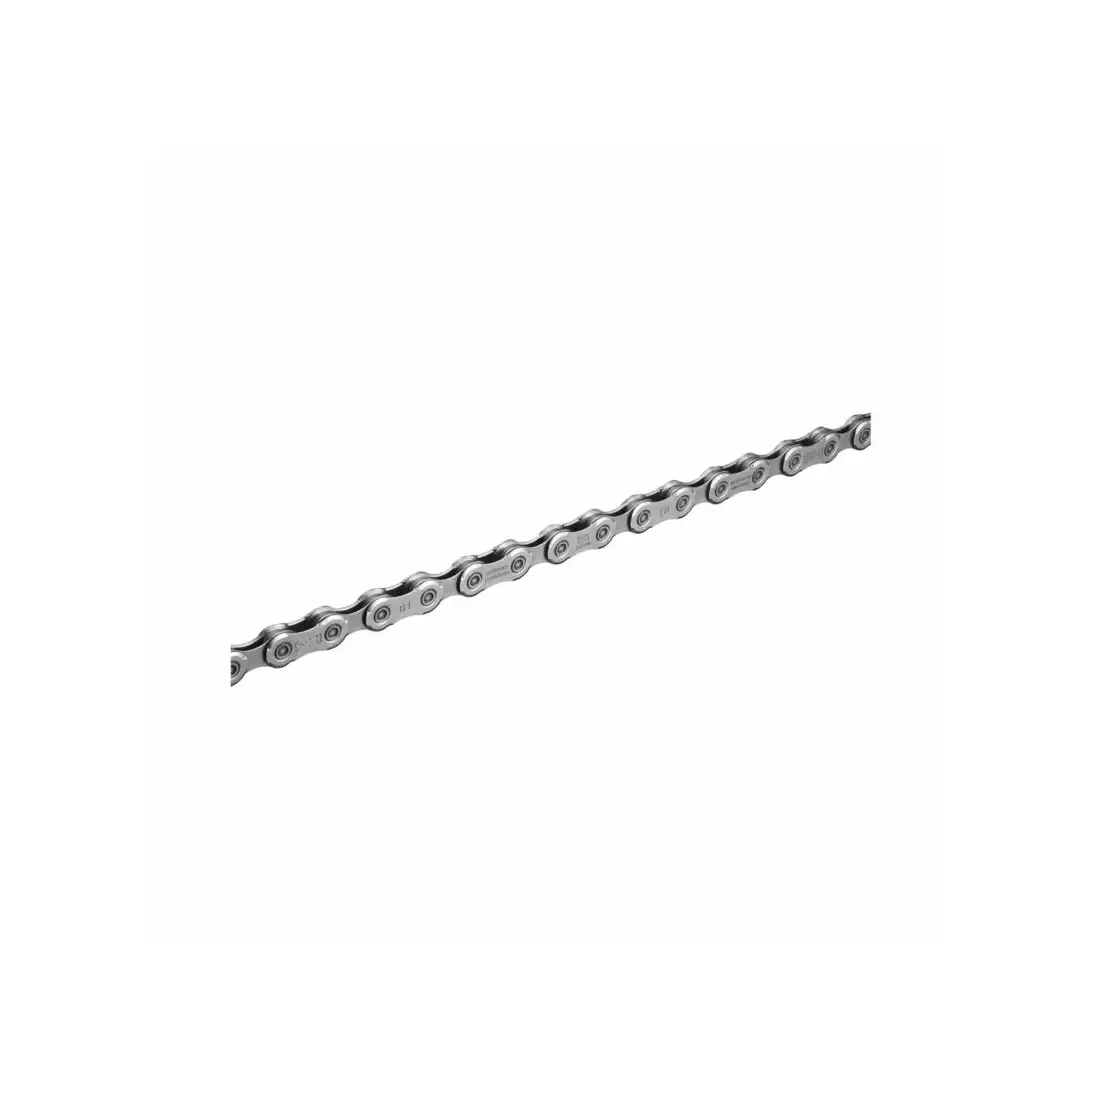 SHIMANO CN-M610 12-speed bicycle chain, 126 links